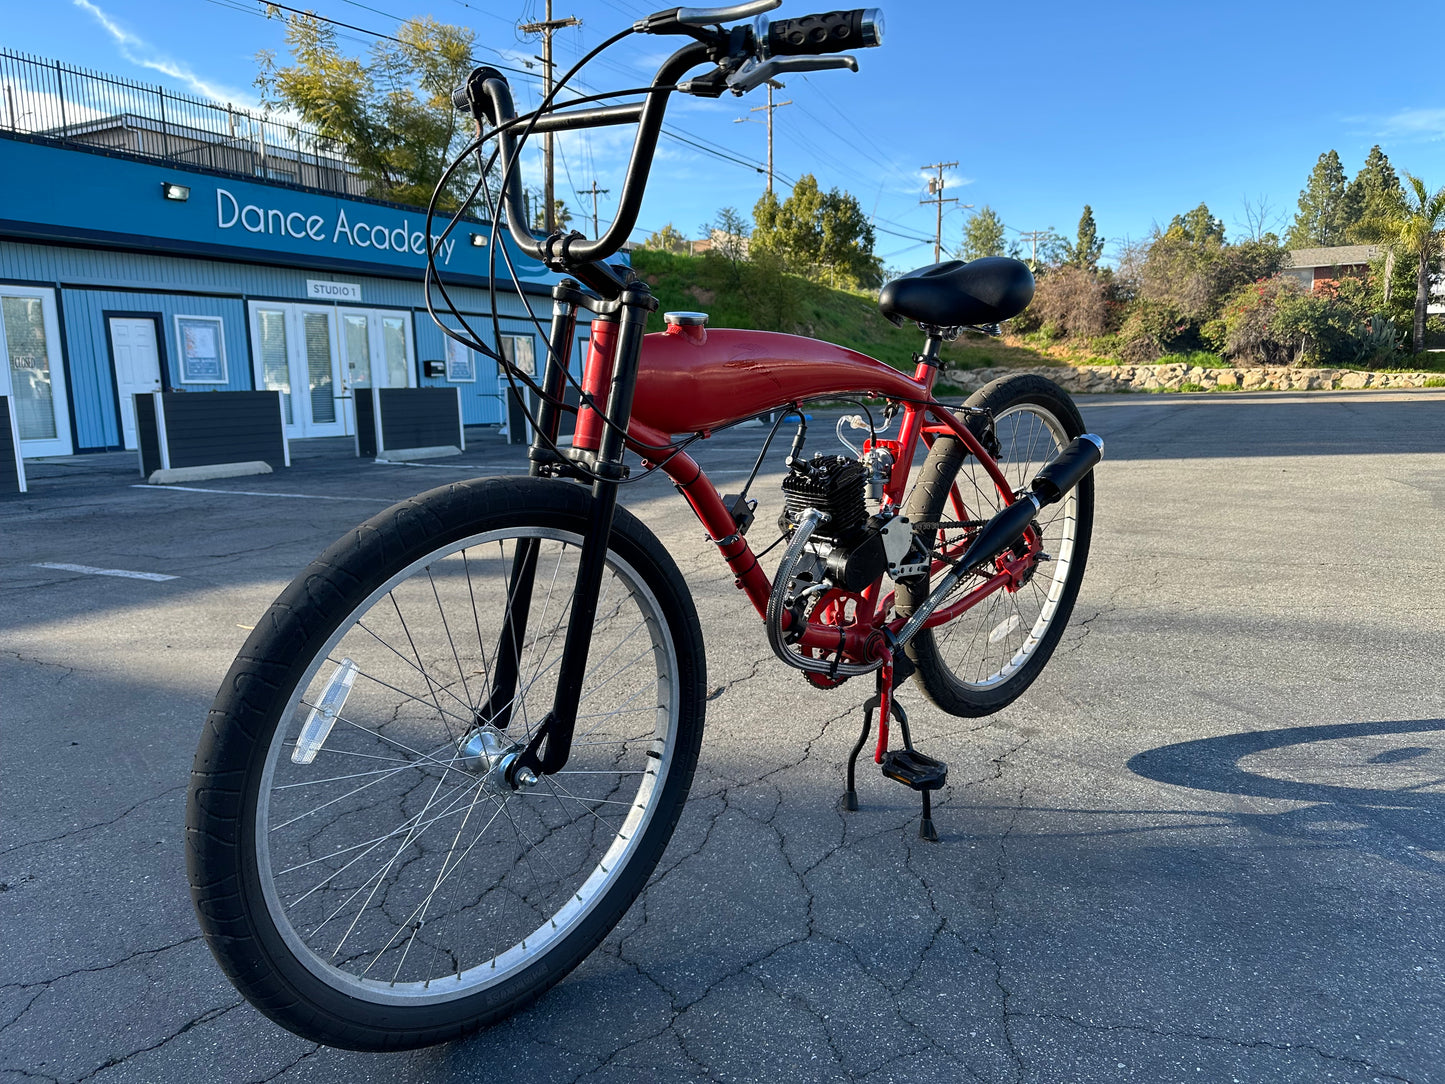 USED Red Series 43 2 Stroke Motorized Bicycle